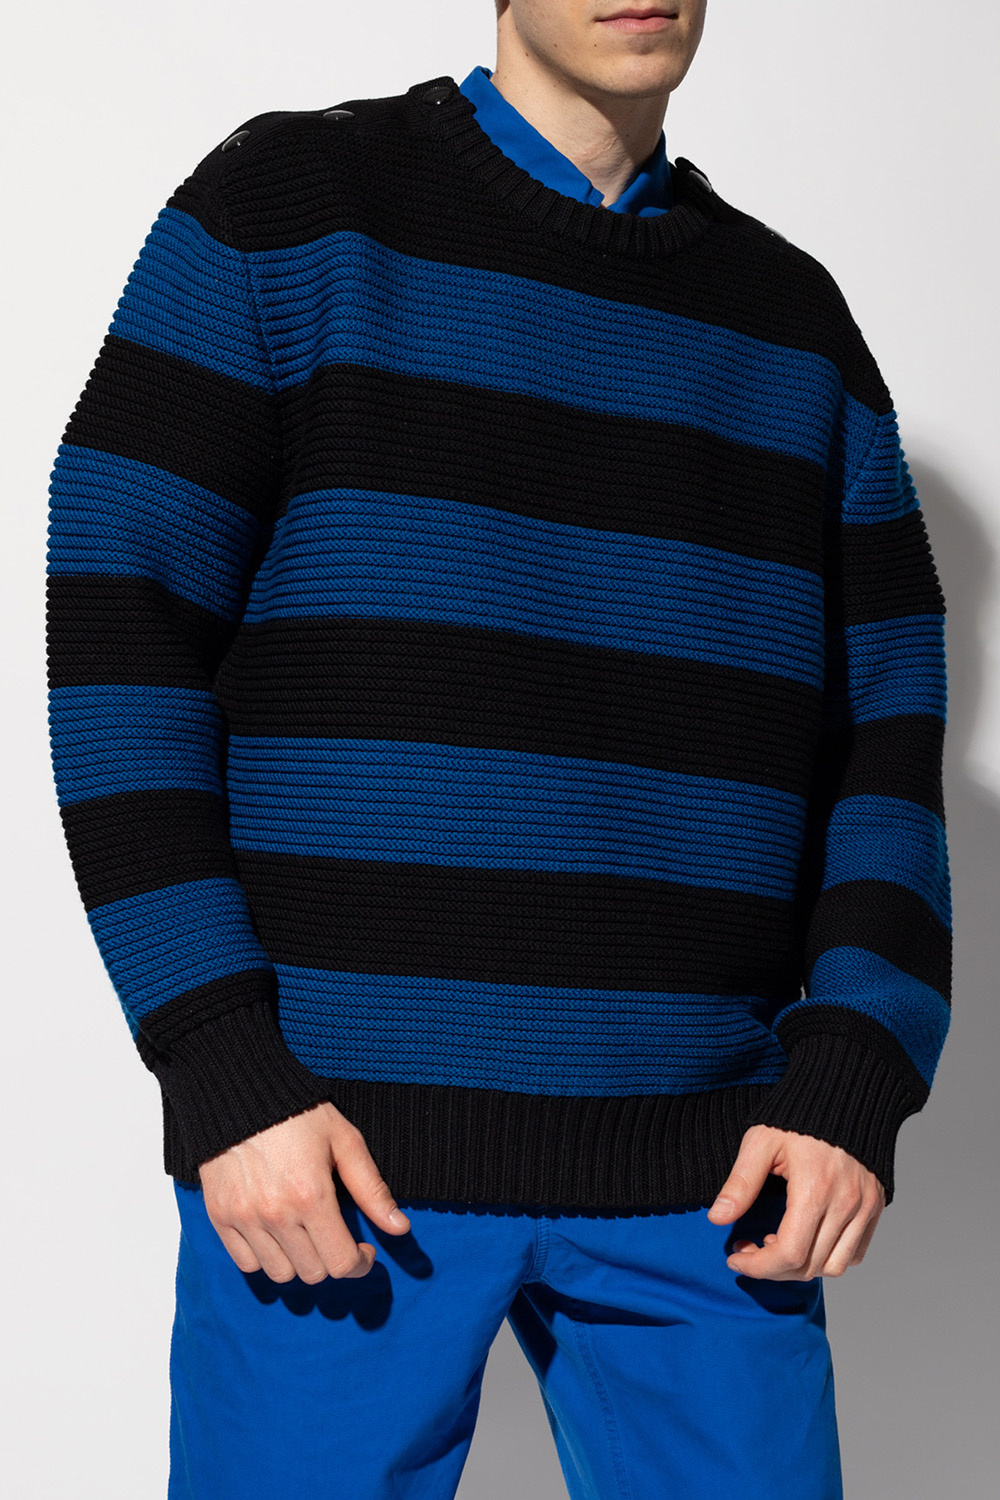 burberry pale Knitted sweater